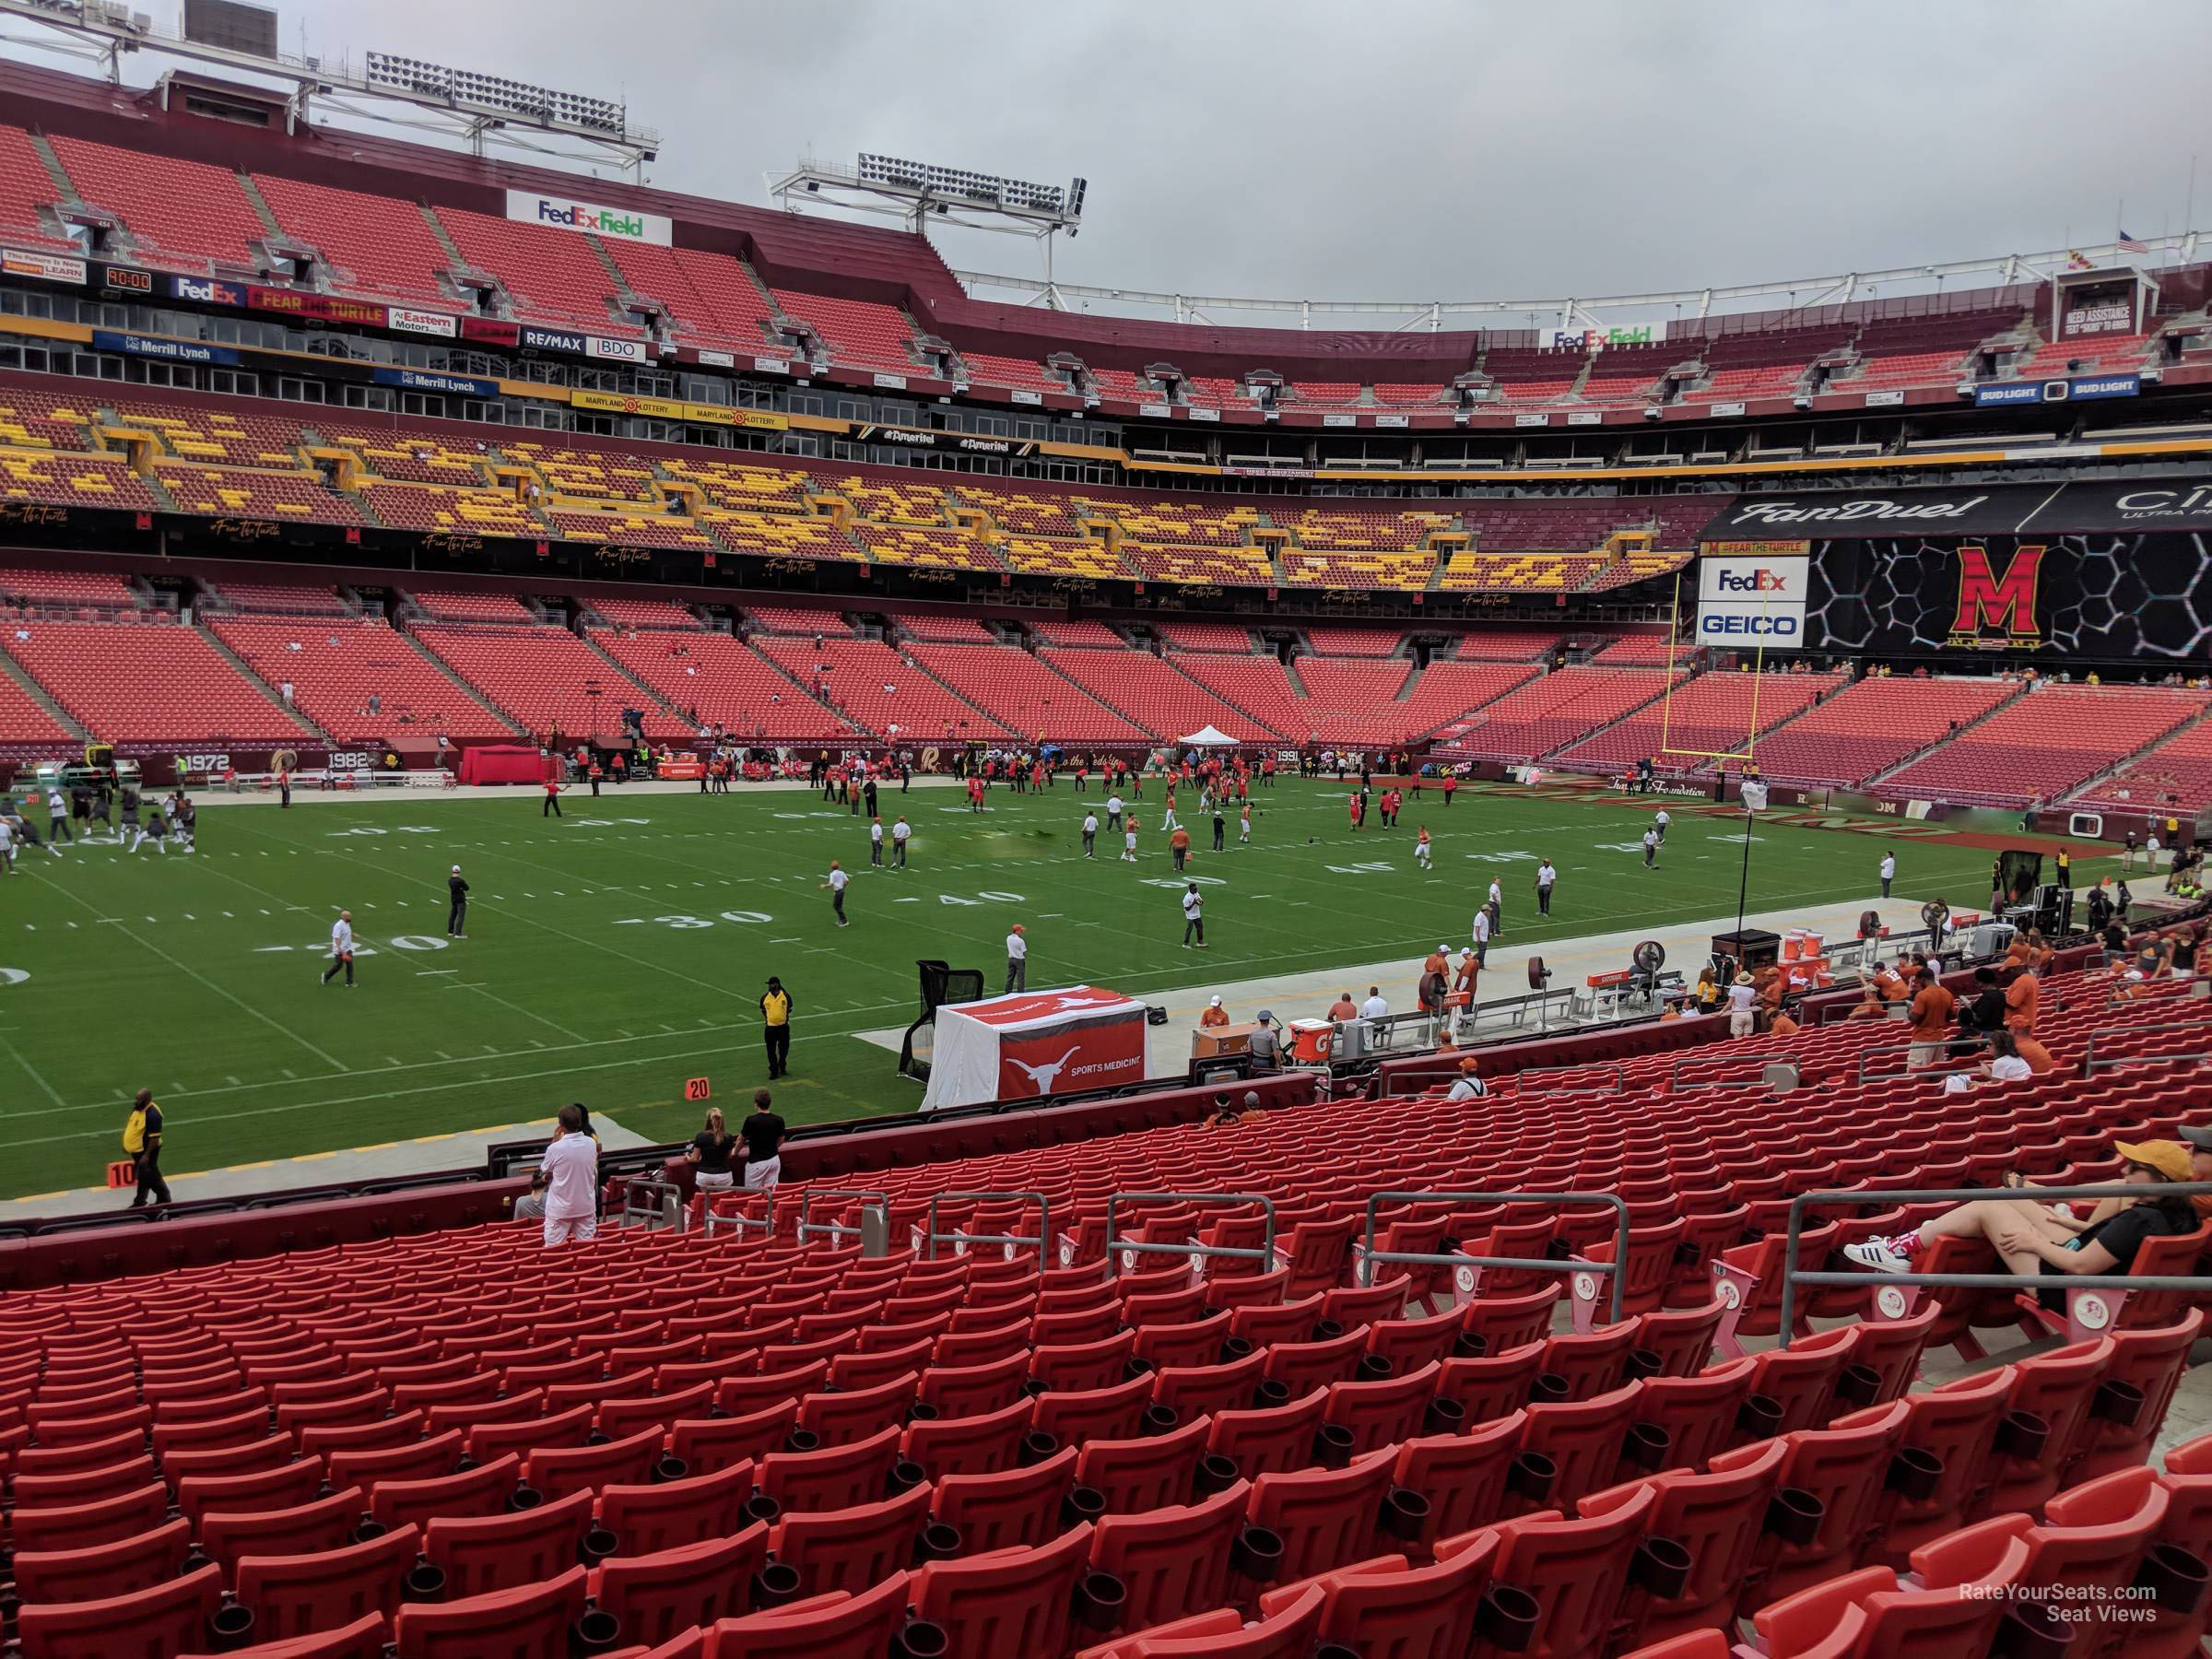 section 125, row 25 seat view  - fedexfield